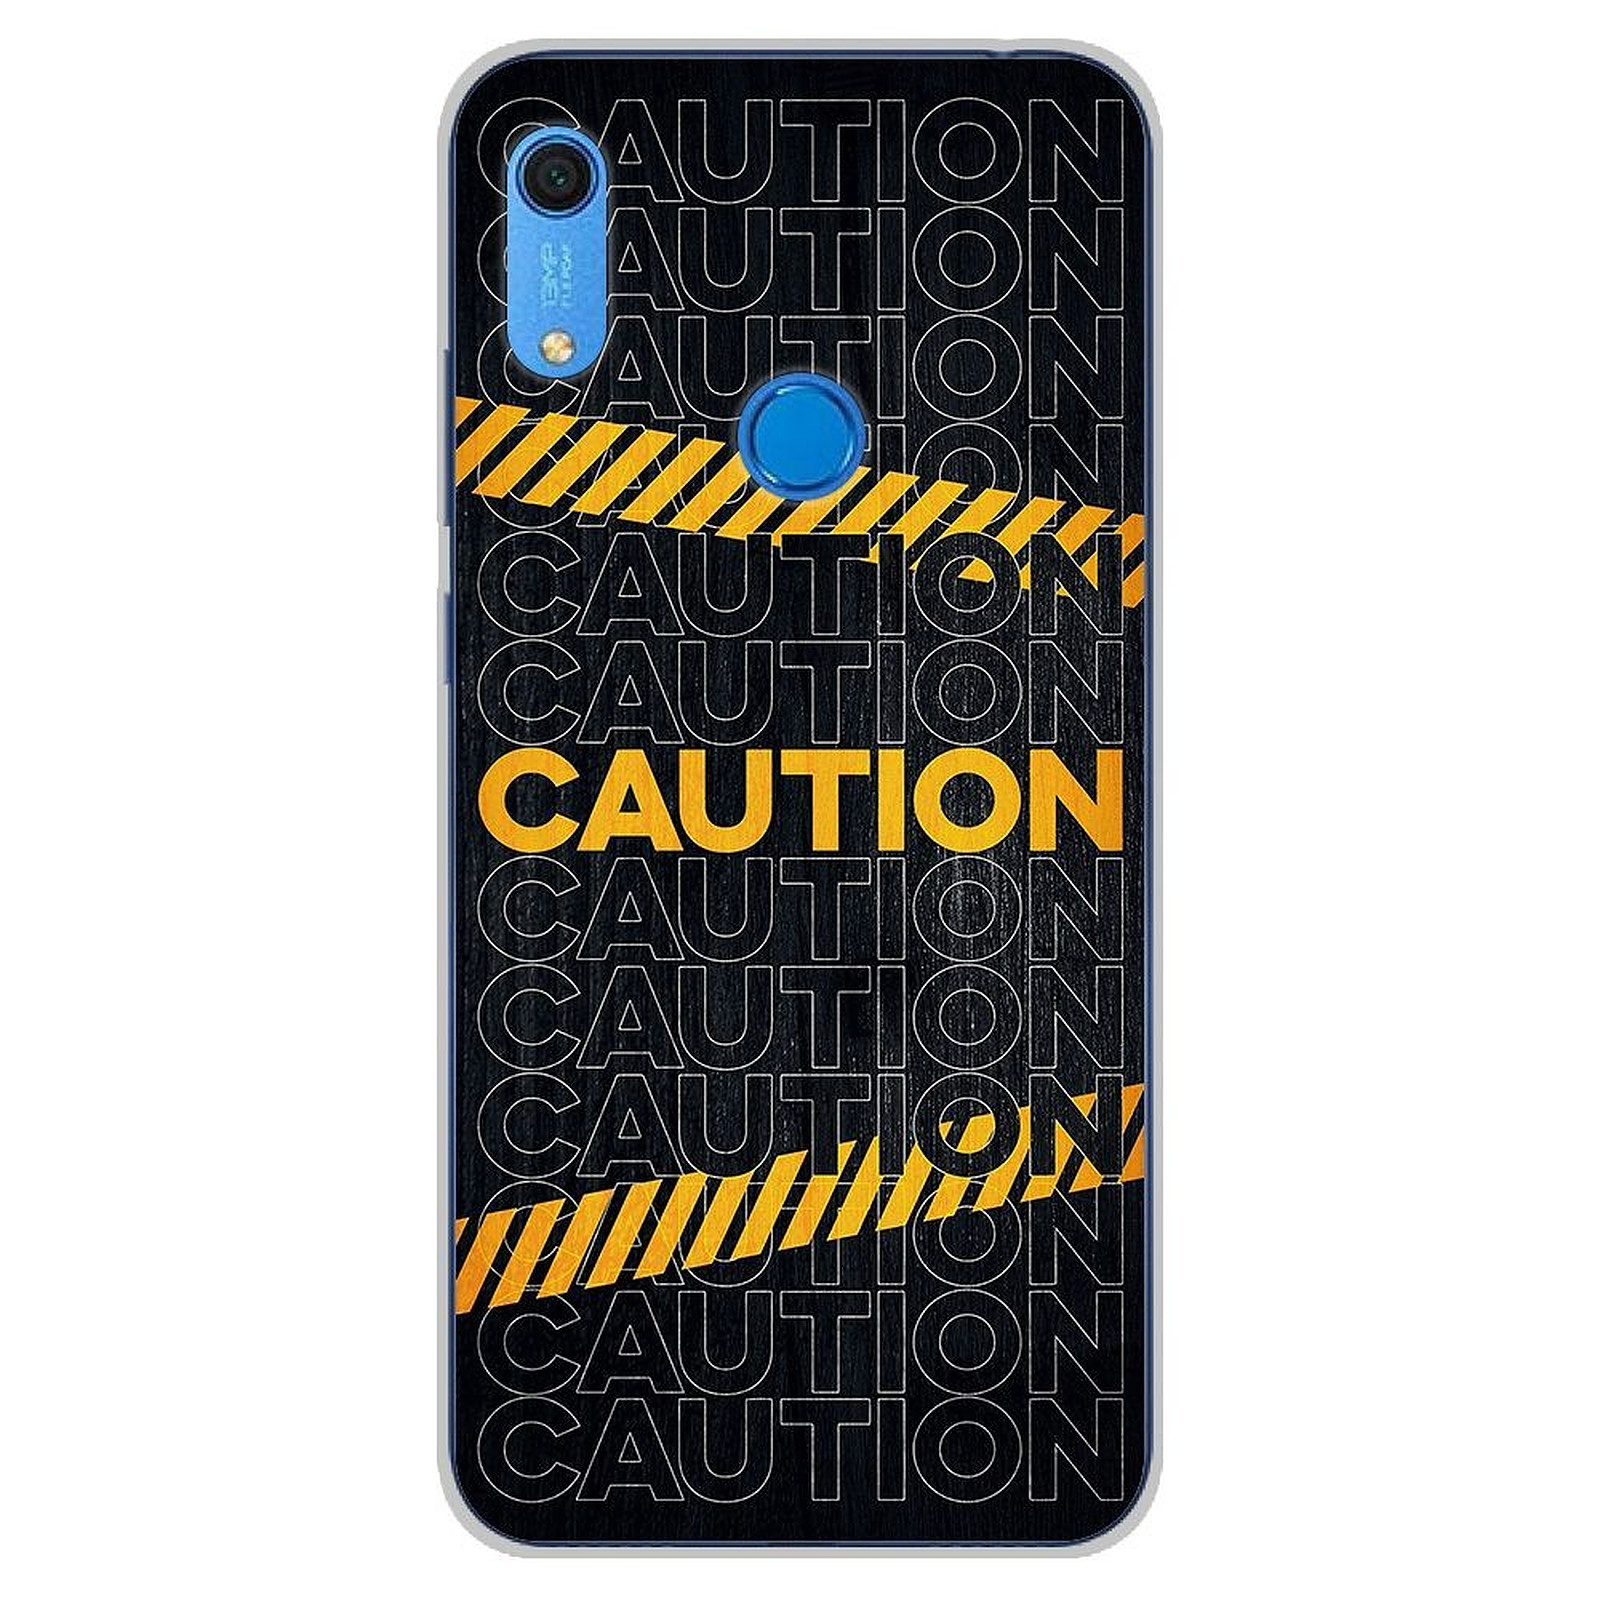 1001 Coques Coque silicone gel Huawei Y6S motif Caution - Coque telephone 1001Coques